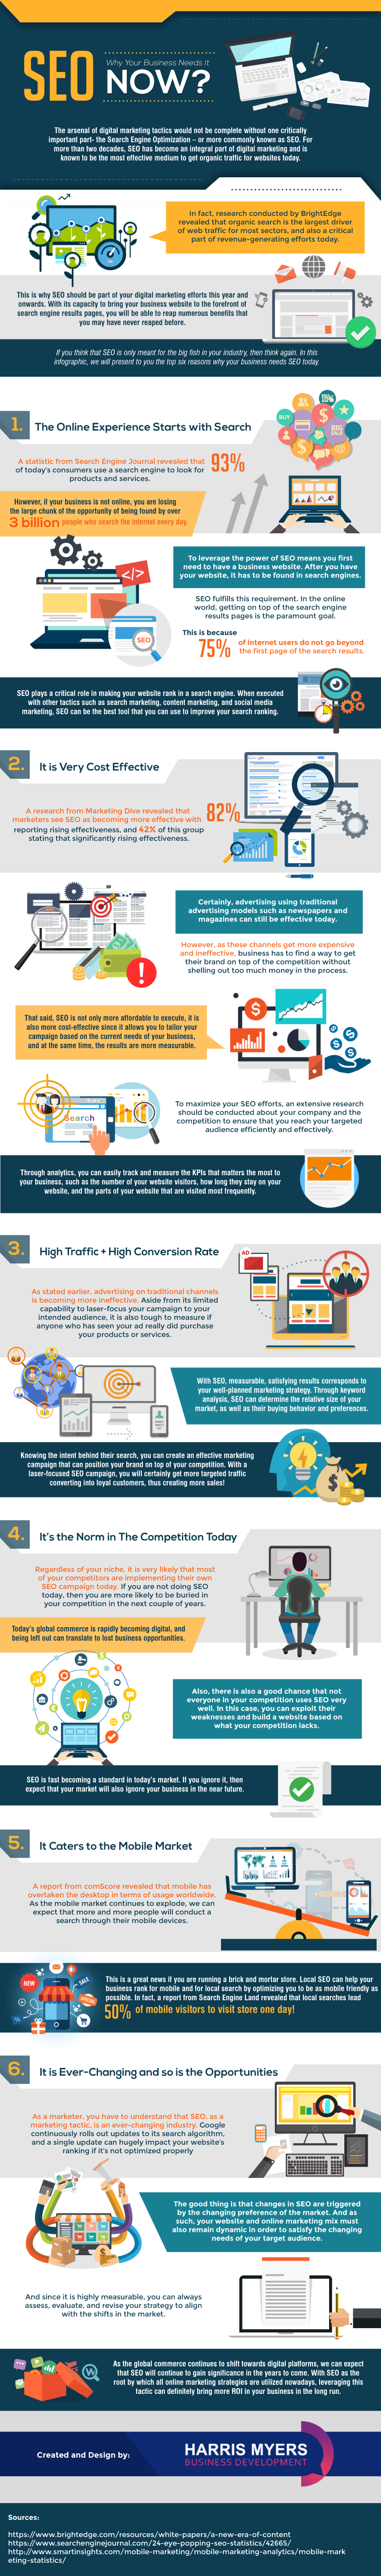 SEO: Why Your Business Needs it NOW? - #Infographic